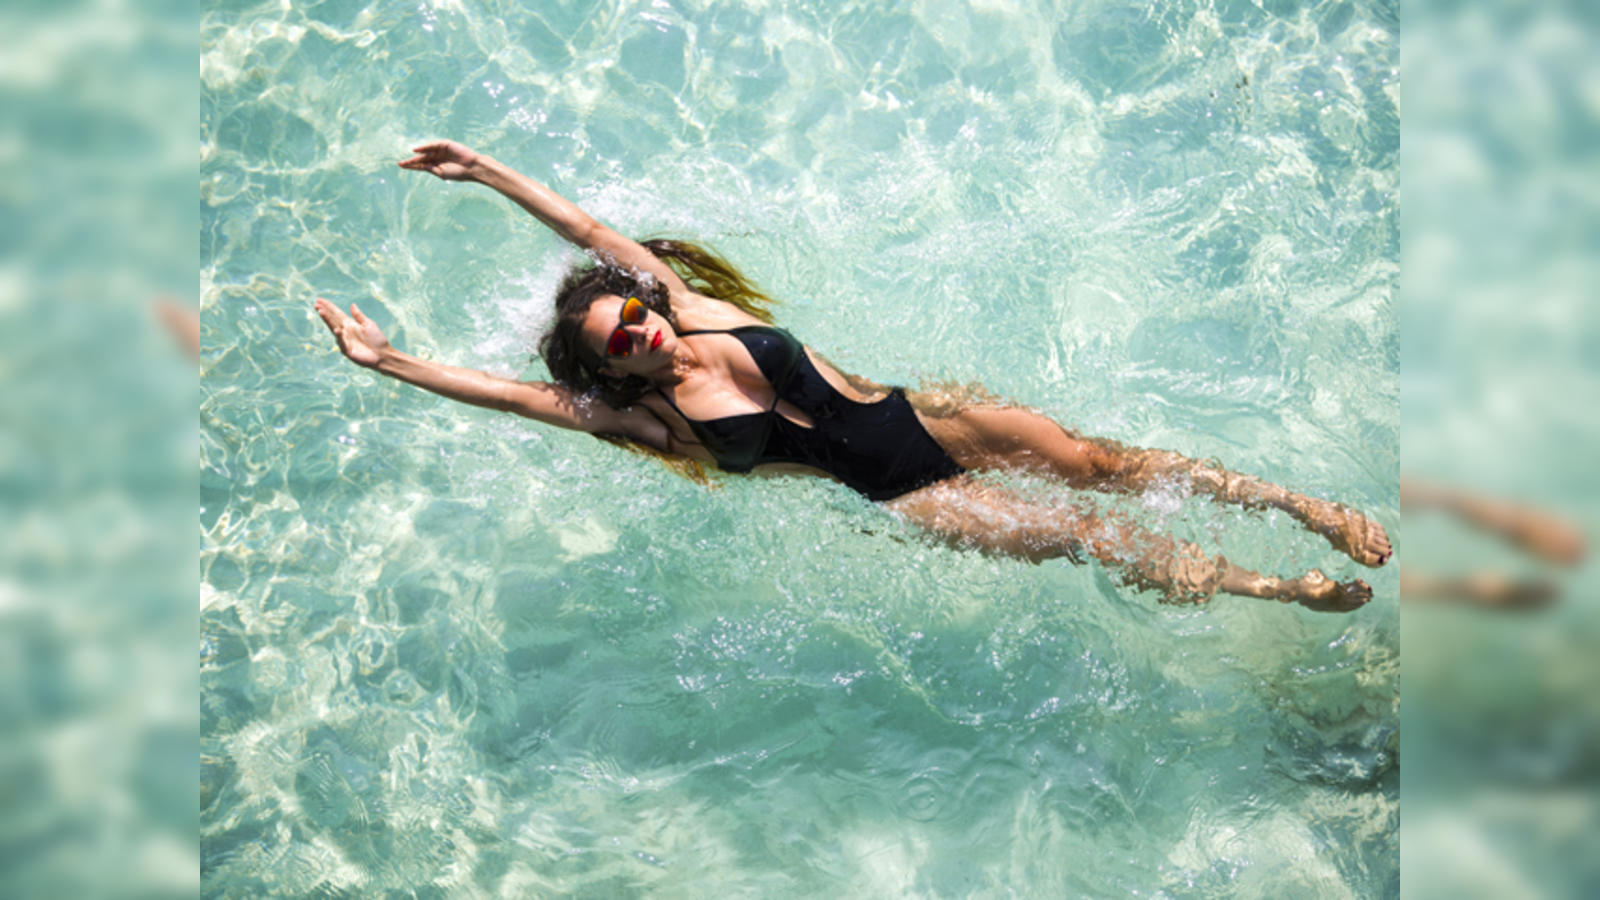 Swimsuit: Who says swimsuits need to be waterproof ? - The